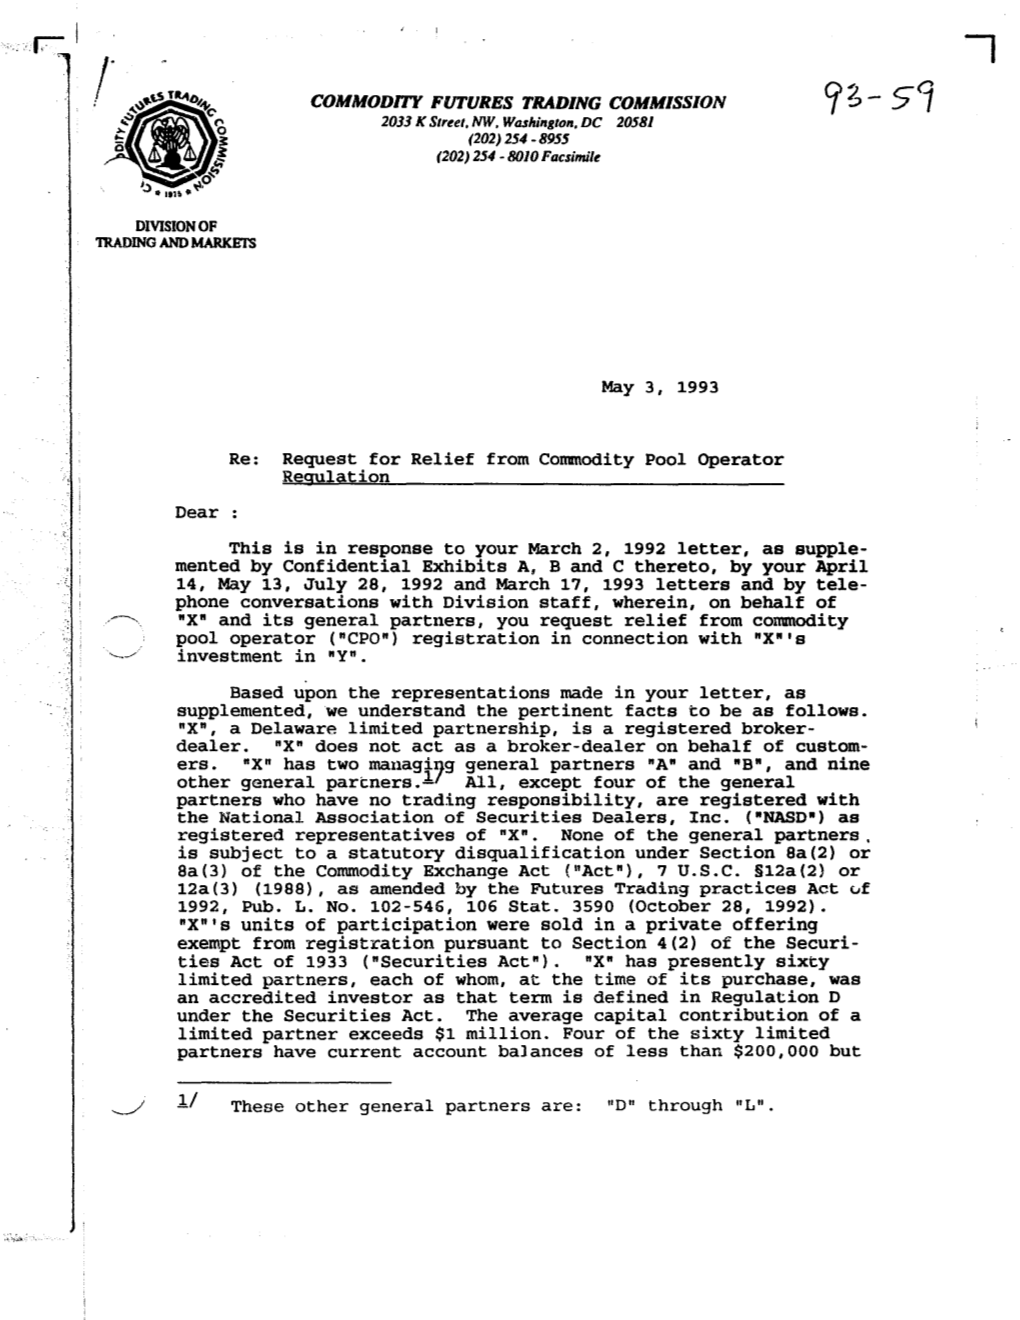 Dear May 3, 1993 Re: Request for Relief from Commodity Pool